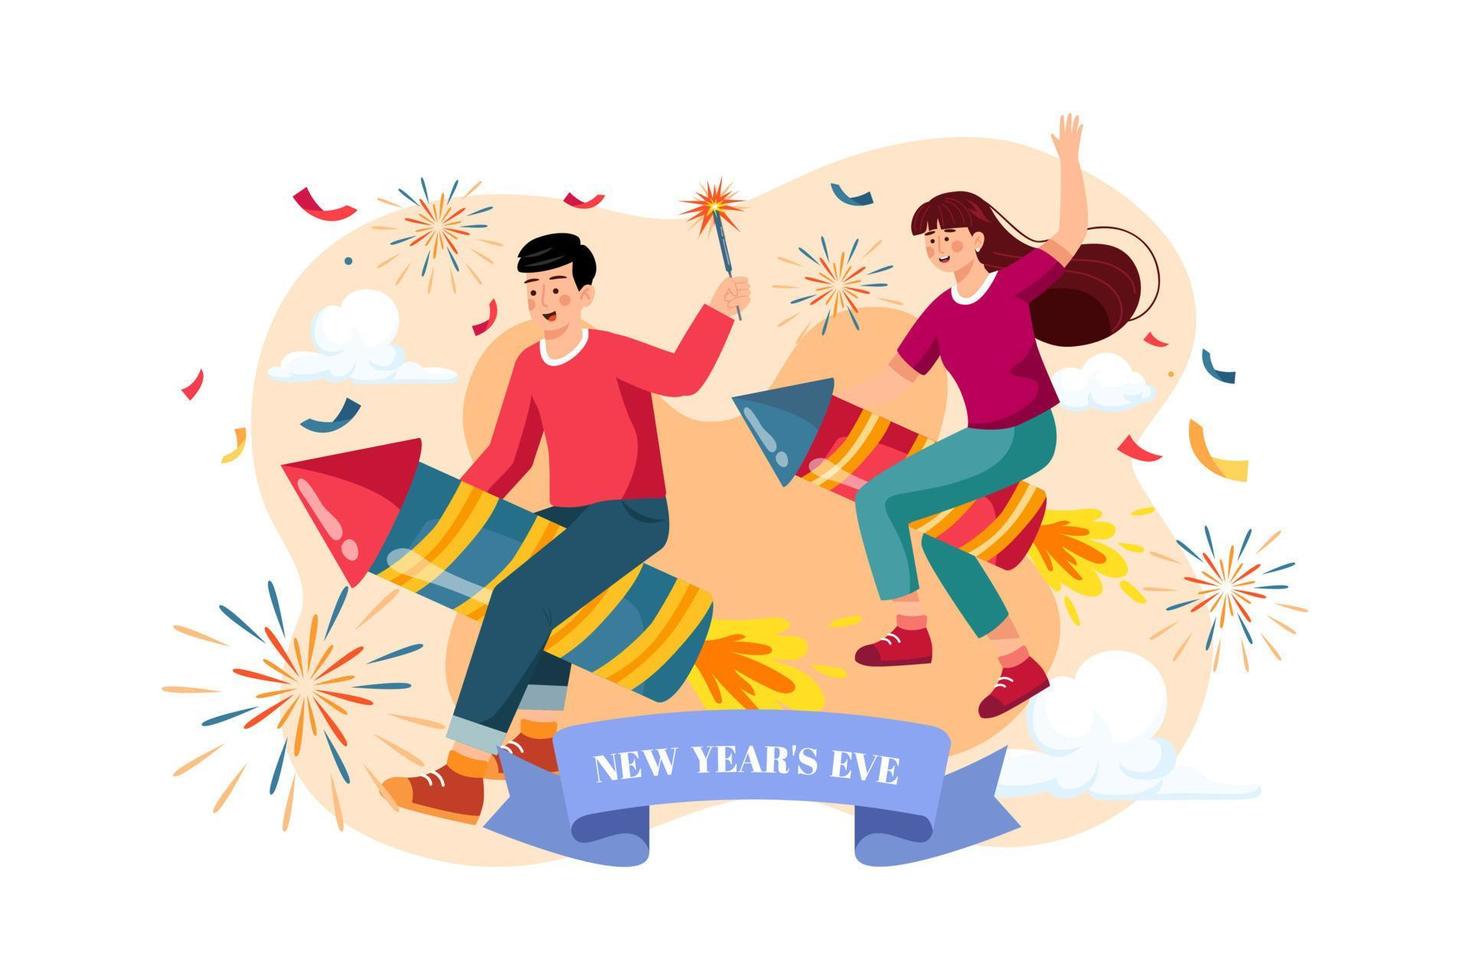 The kids riding new year's fireworks. vector